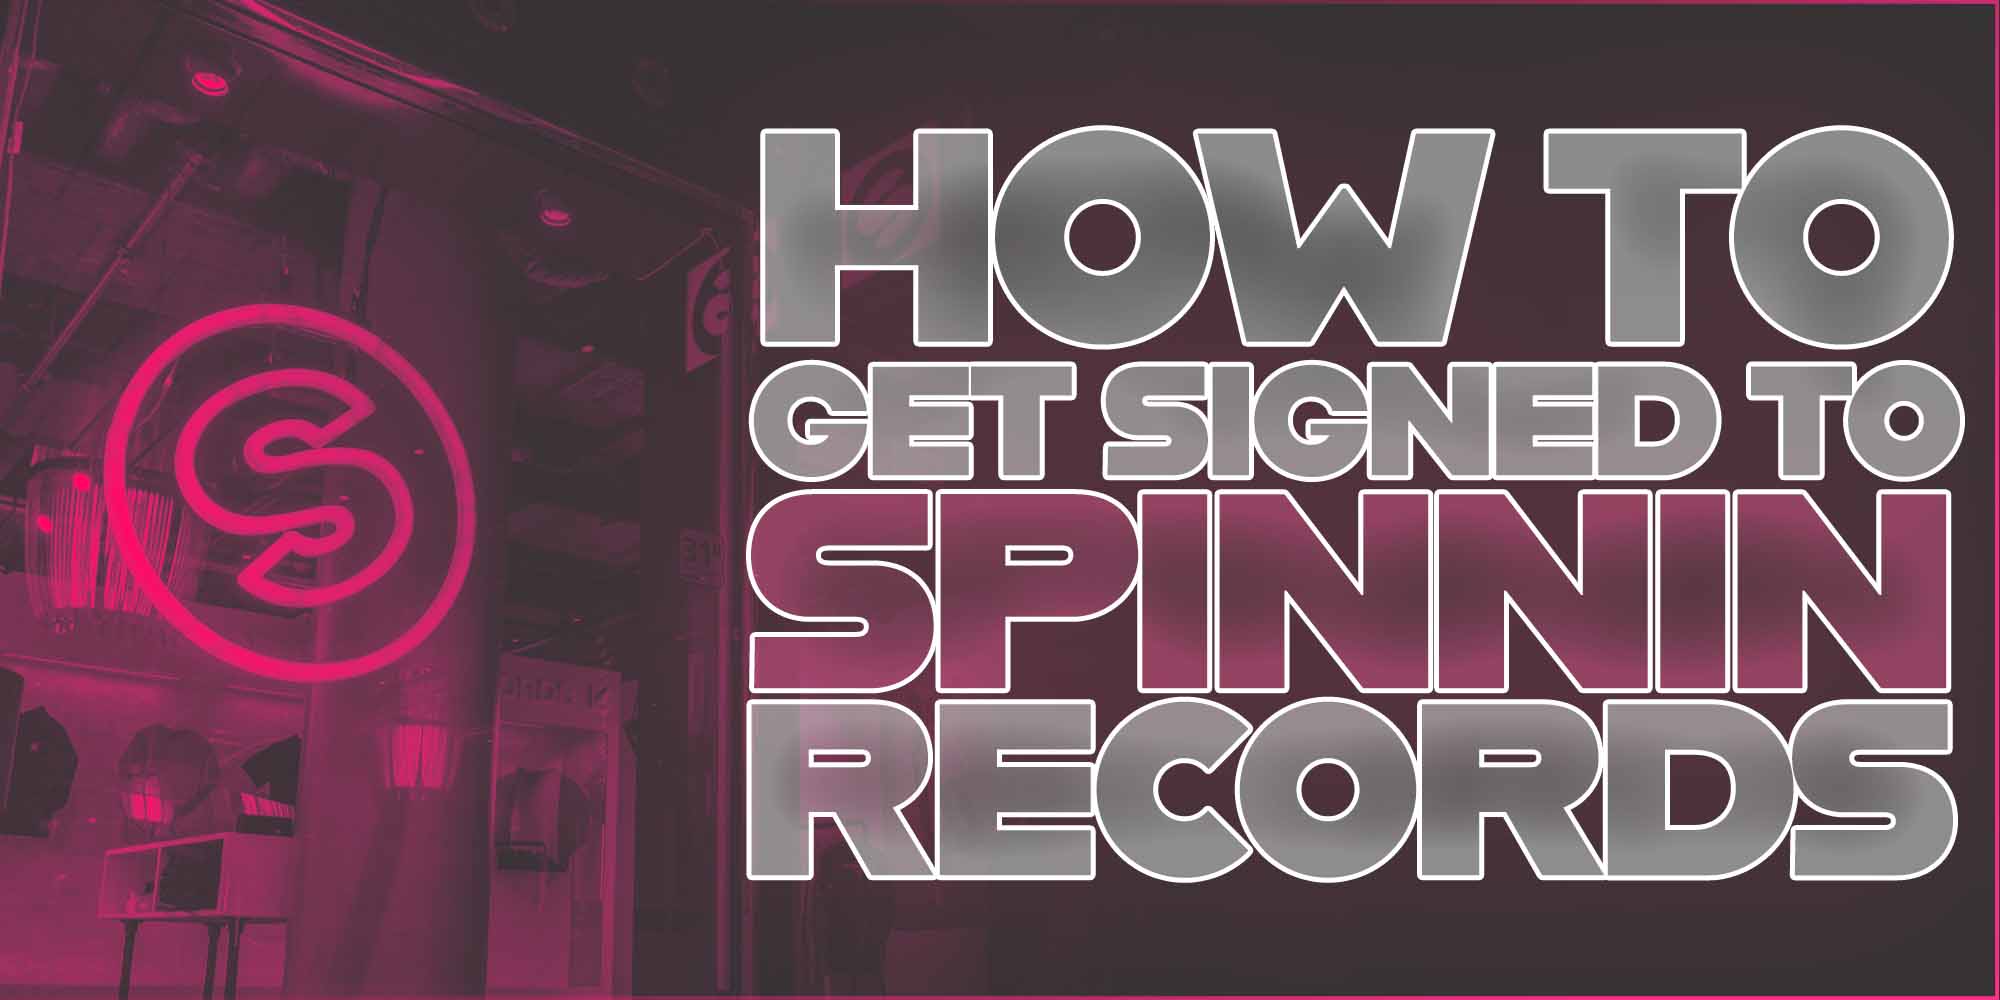 How To Get Signed To Spinnin Records